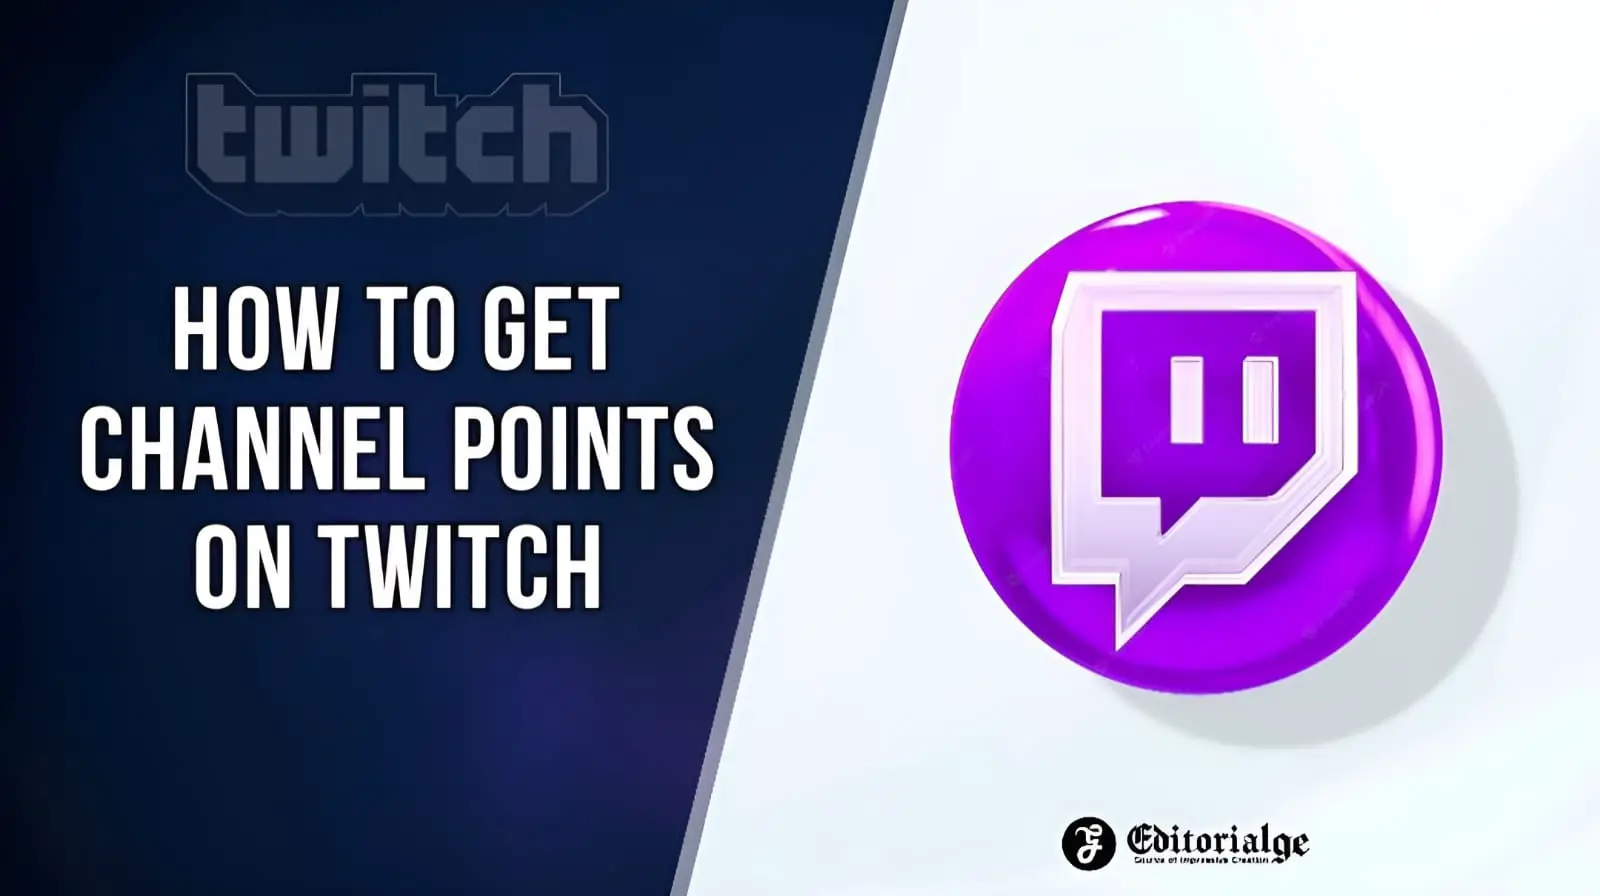 How to get channel points on twitch